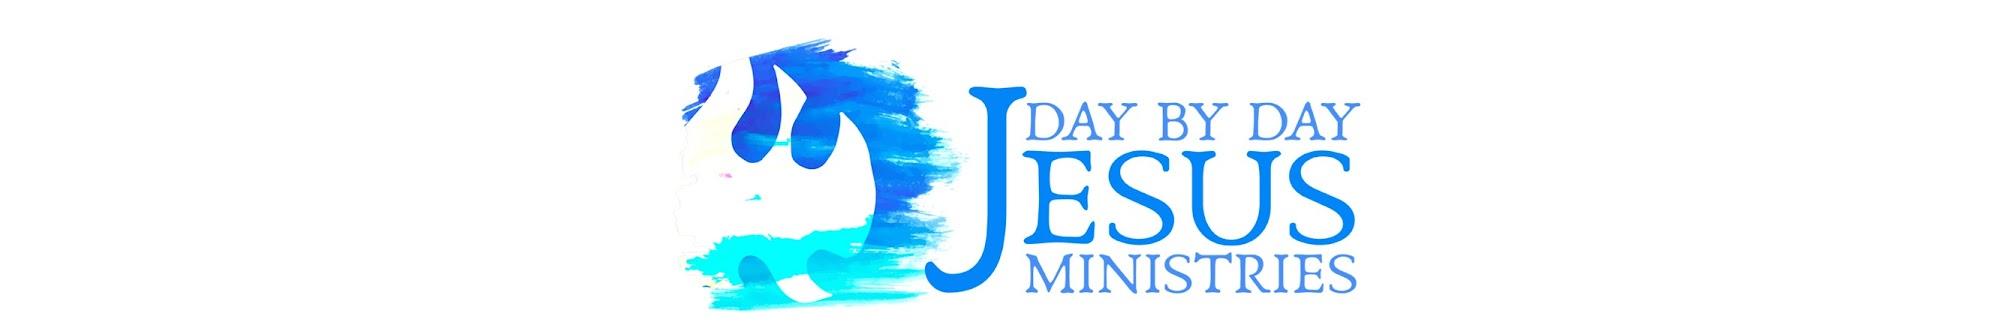 Day By Day Jesus Ministries